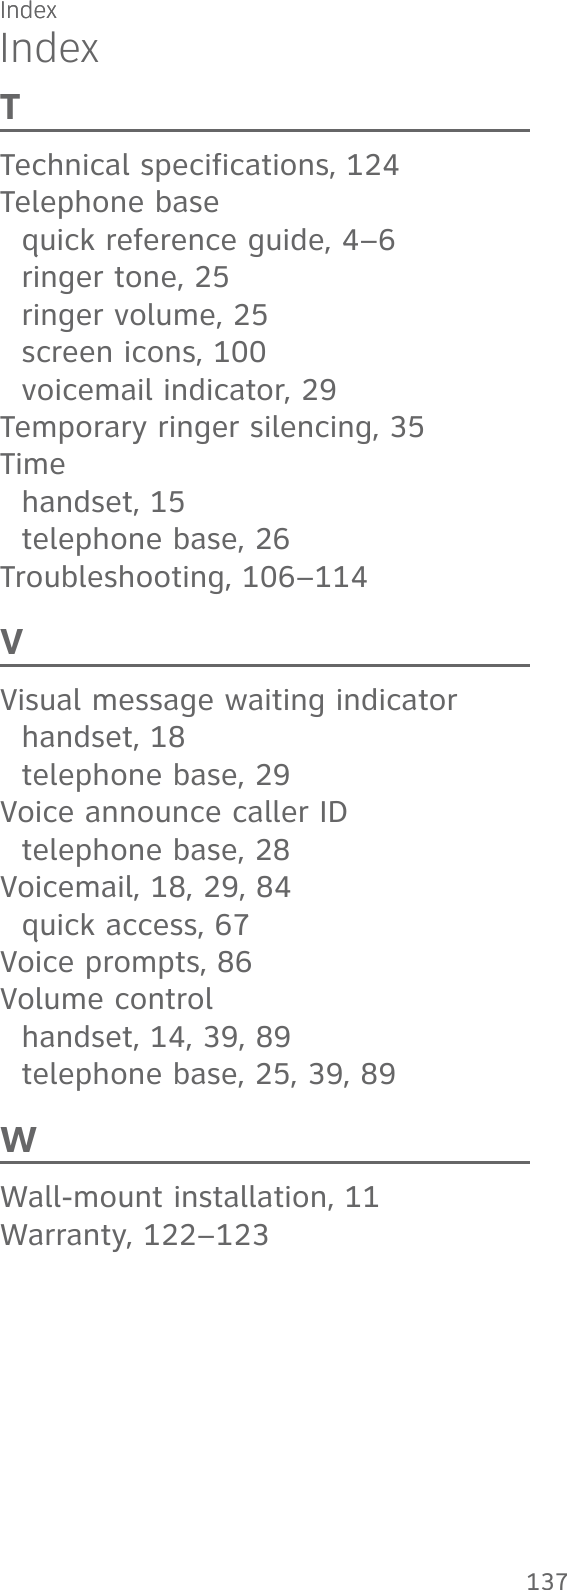 IndexIndexTTechnical specifications, 124Telephone basequick reference guide, 4–6ringer tone, 25ringer volume, 25screen icons, 100voicemail indicator, 29Temporary ringer silencing, 35Timehandset, 15telephone base, 26Troubleshooting, 106–114VVisual message waiting indicatorhandset, 18telephone base, 29Voice announce caller IDtelephone base, 28Voicemail, 18, 29, 84quick access, 67Voice prompts, 86Volume controlhandset, 14, 39, 89telephone base, 25, 39, 89WWall-mount installation, 11Warranty, 122–123137Index